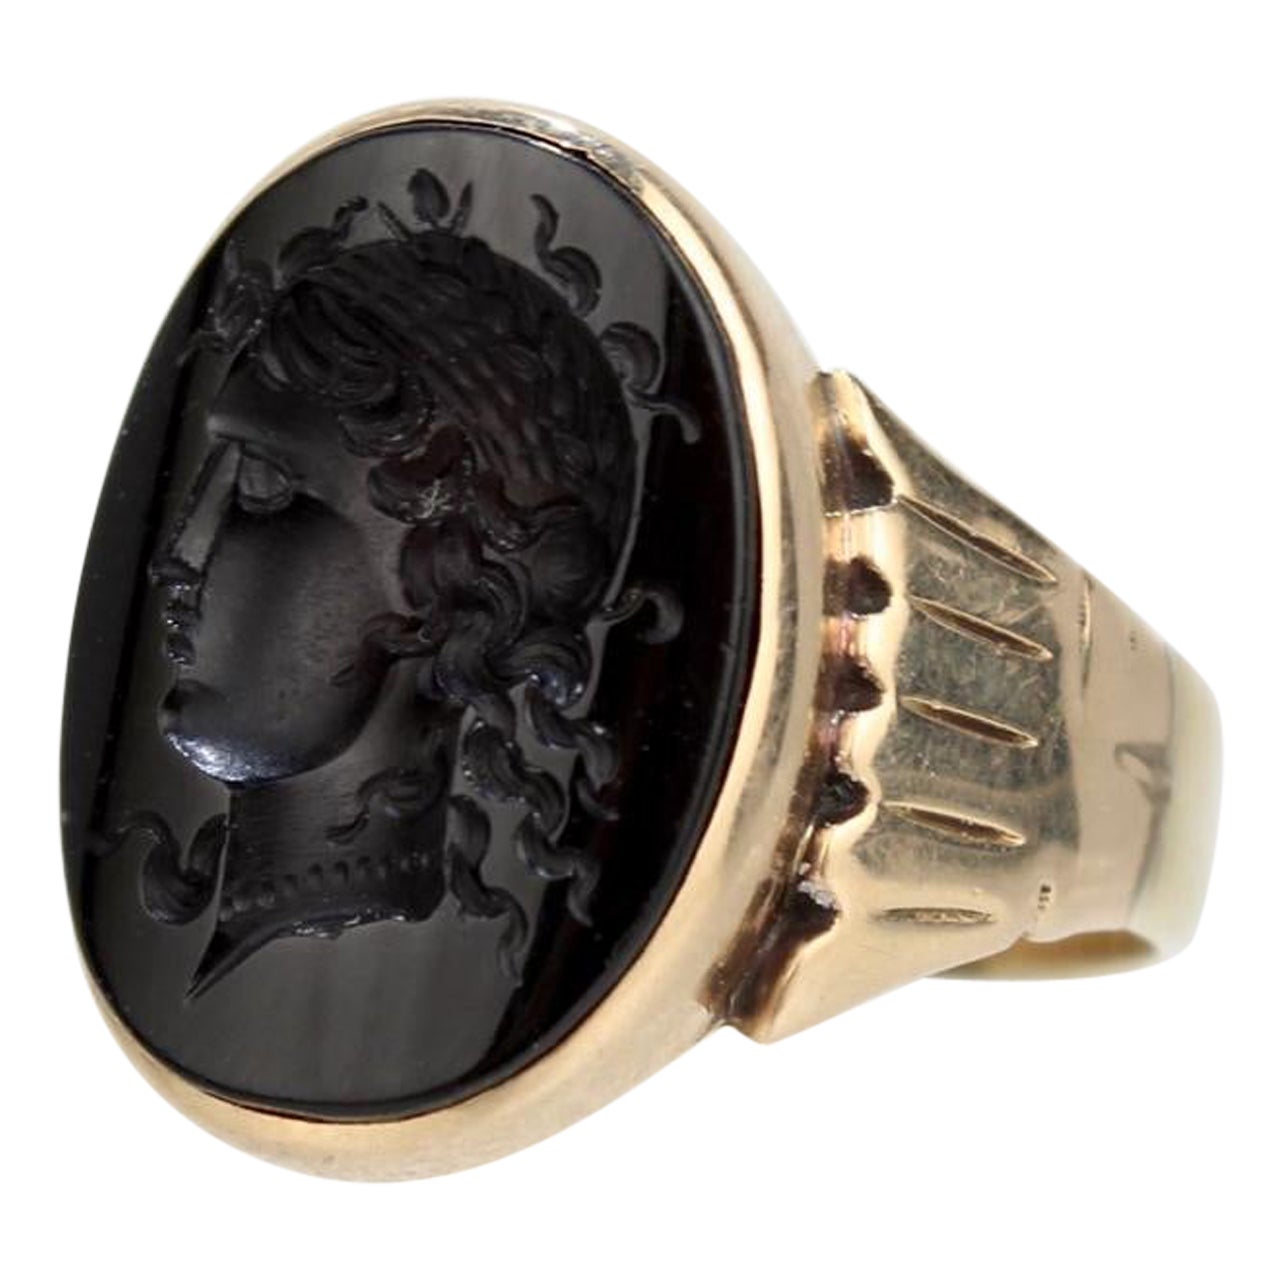 Antique Victorian Cameo 14 Karat Gold & Onyx Signet Ring with Dedication